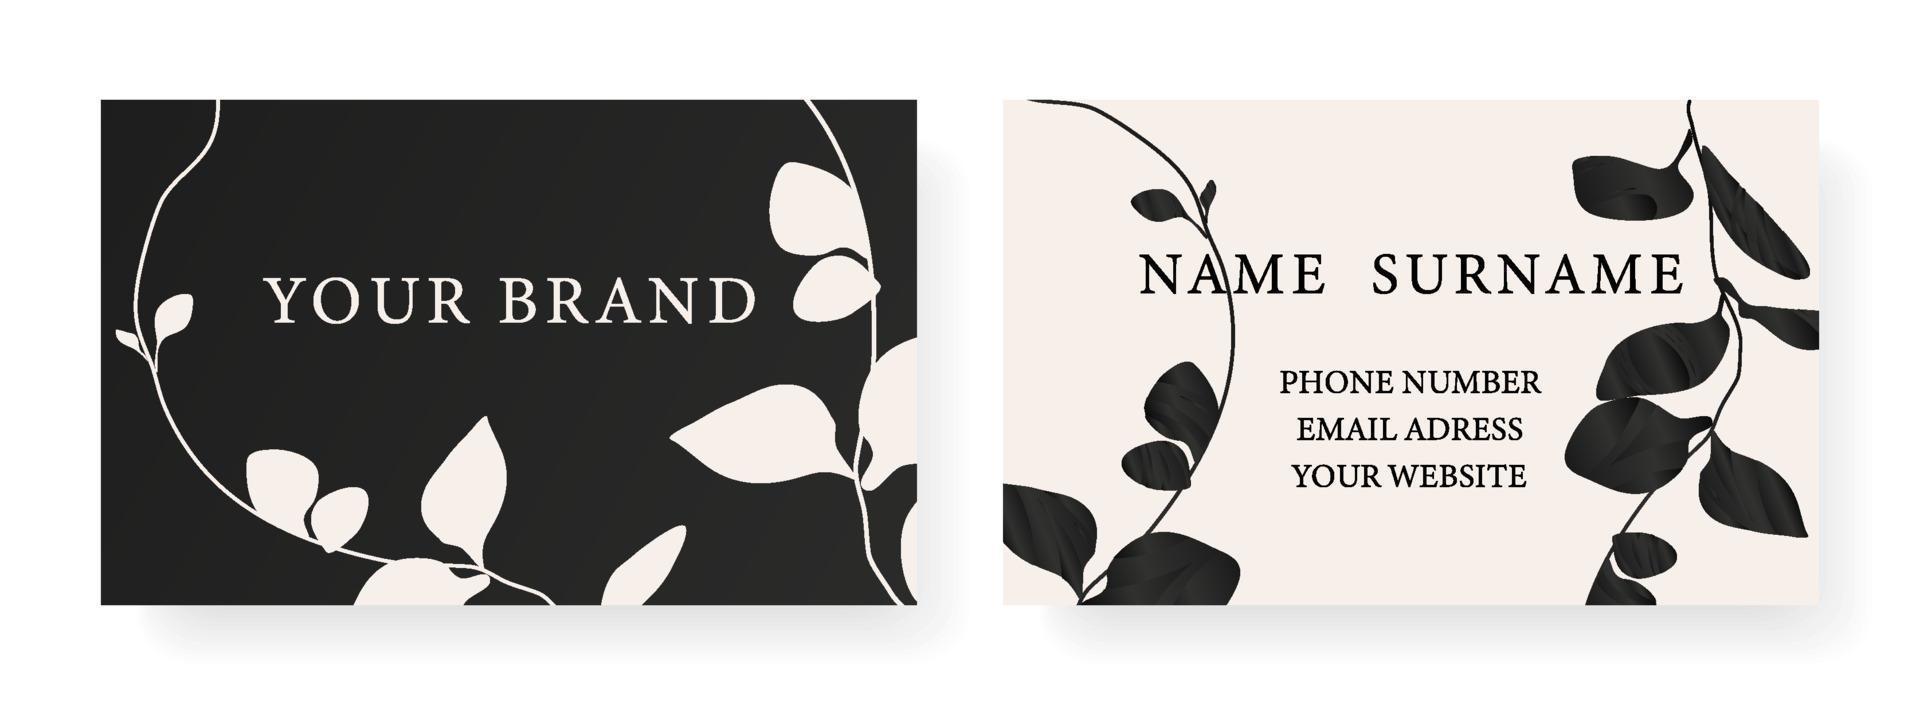 Business Card template design floral modern  background for Luxury. Vector template for banner, premium invitation, luxury voucher, prestigious gift certificate.